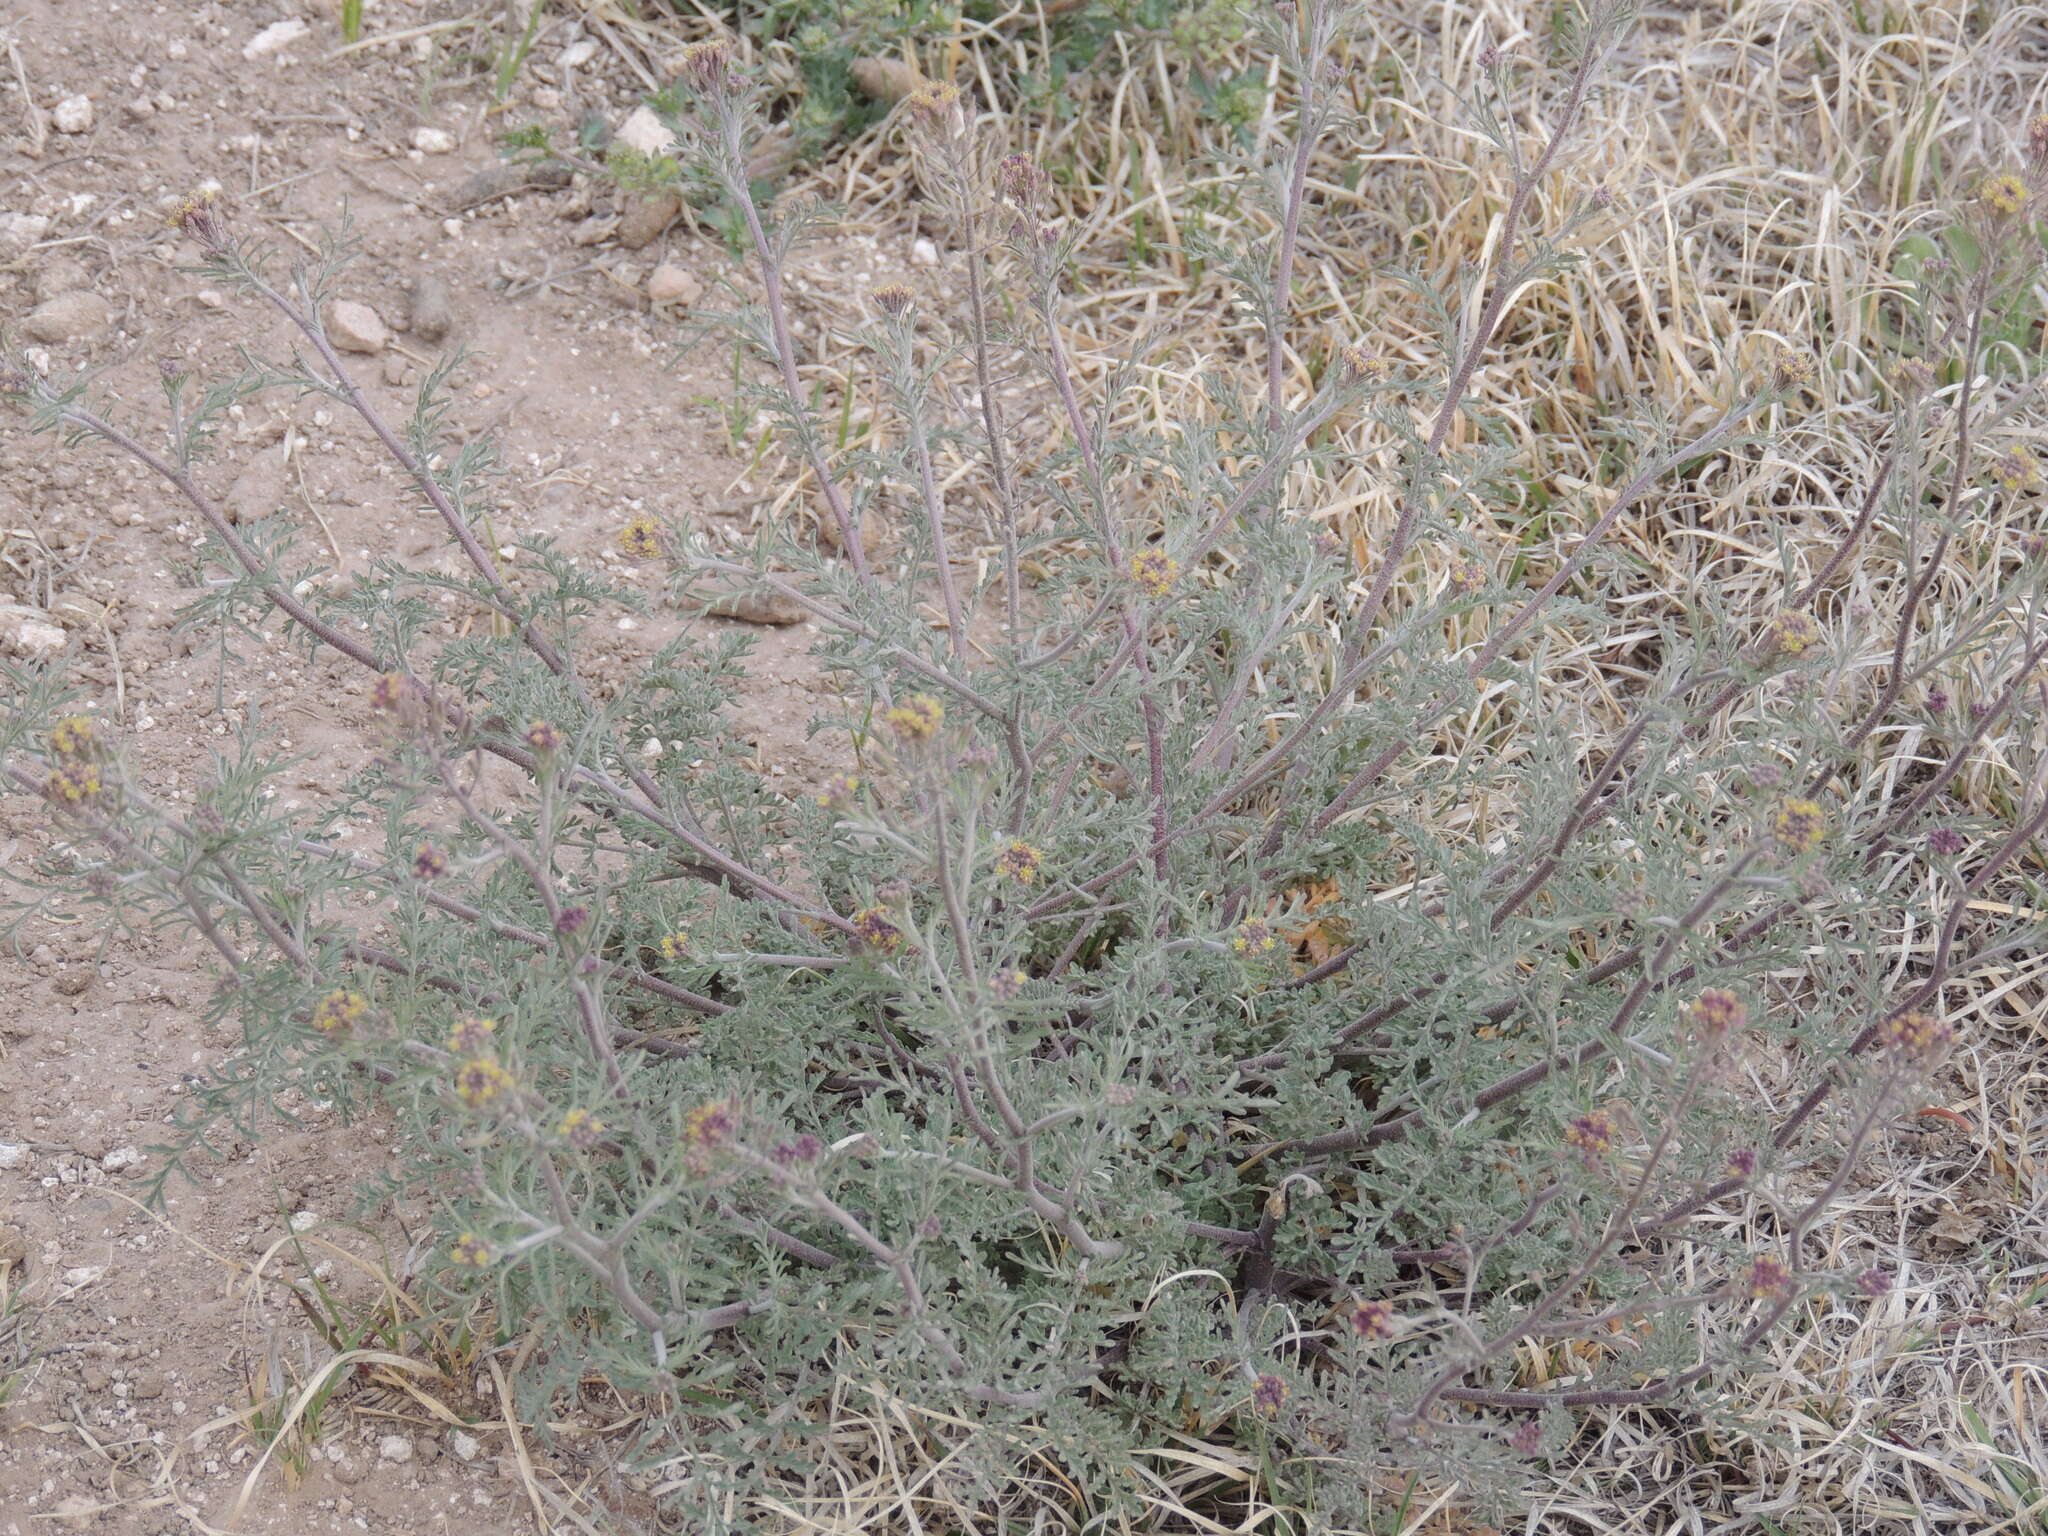 Image of western tansymustard